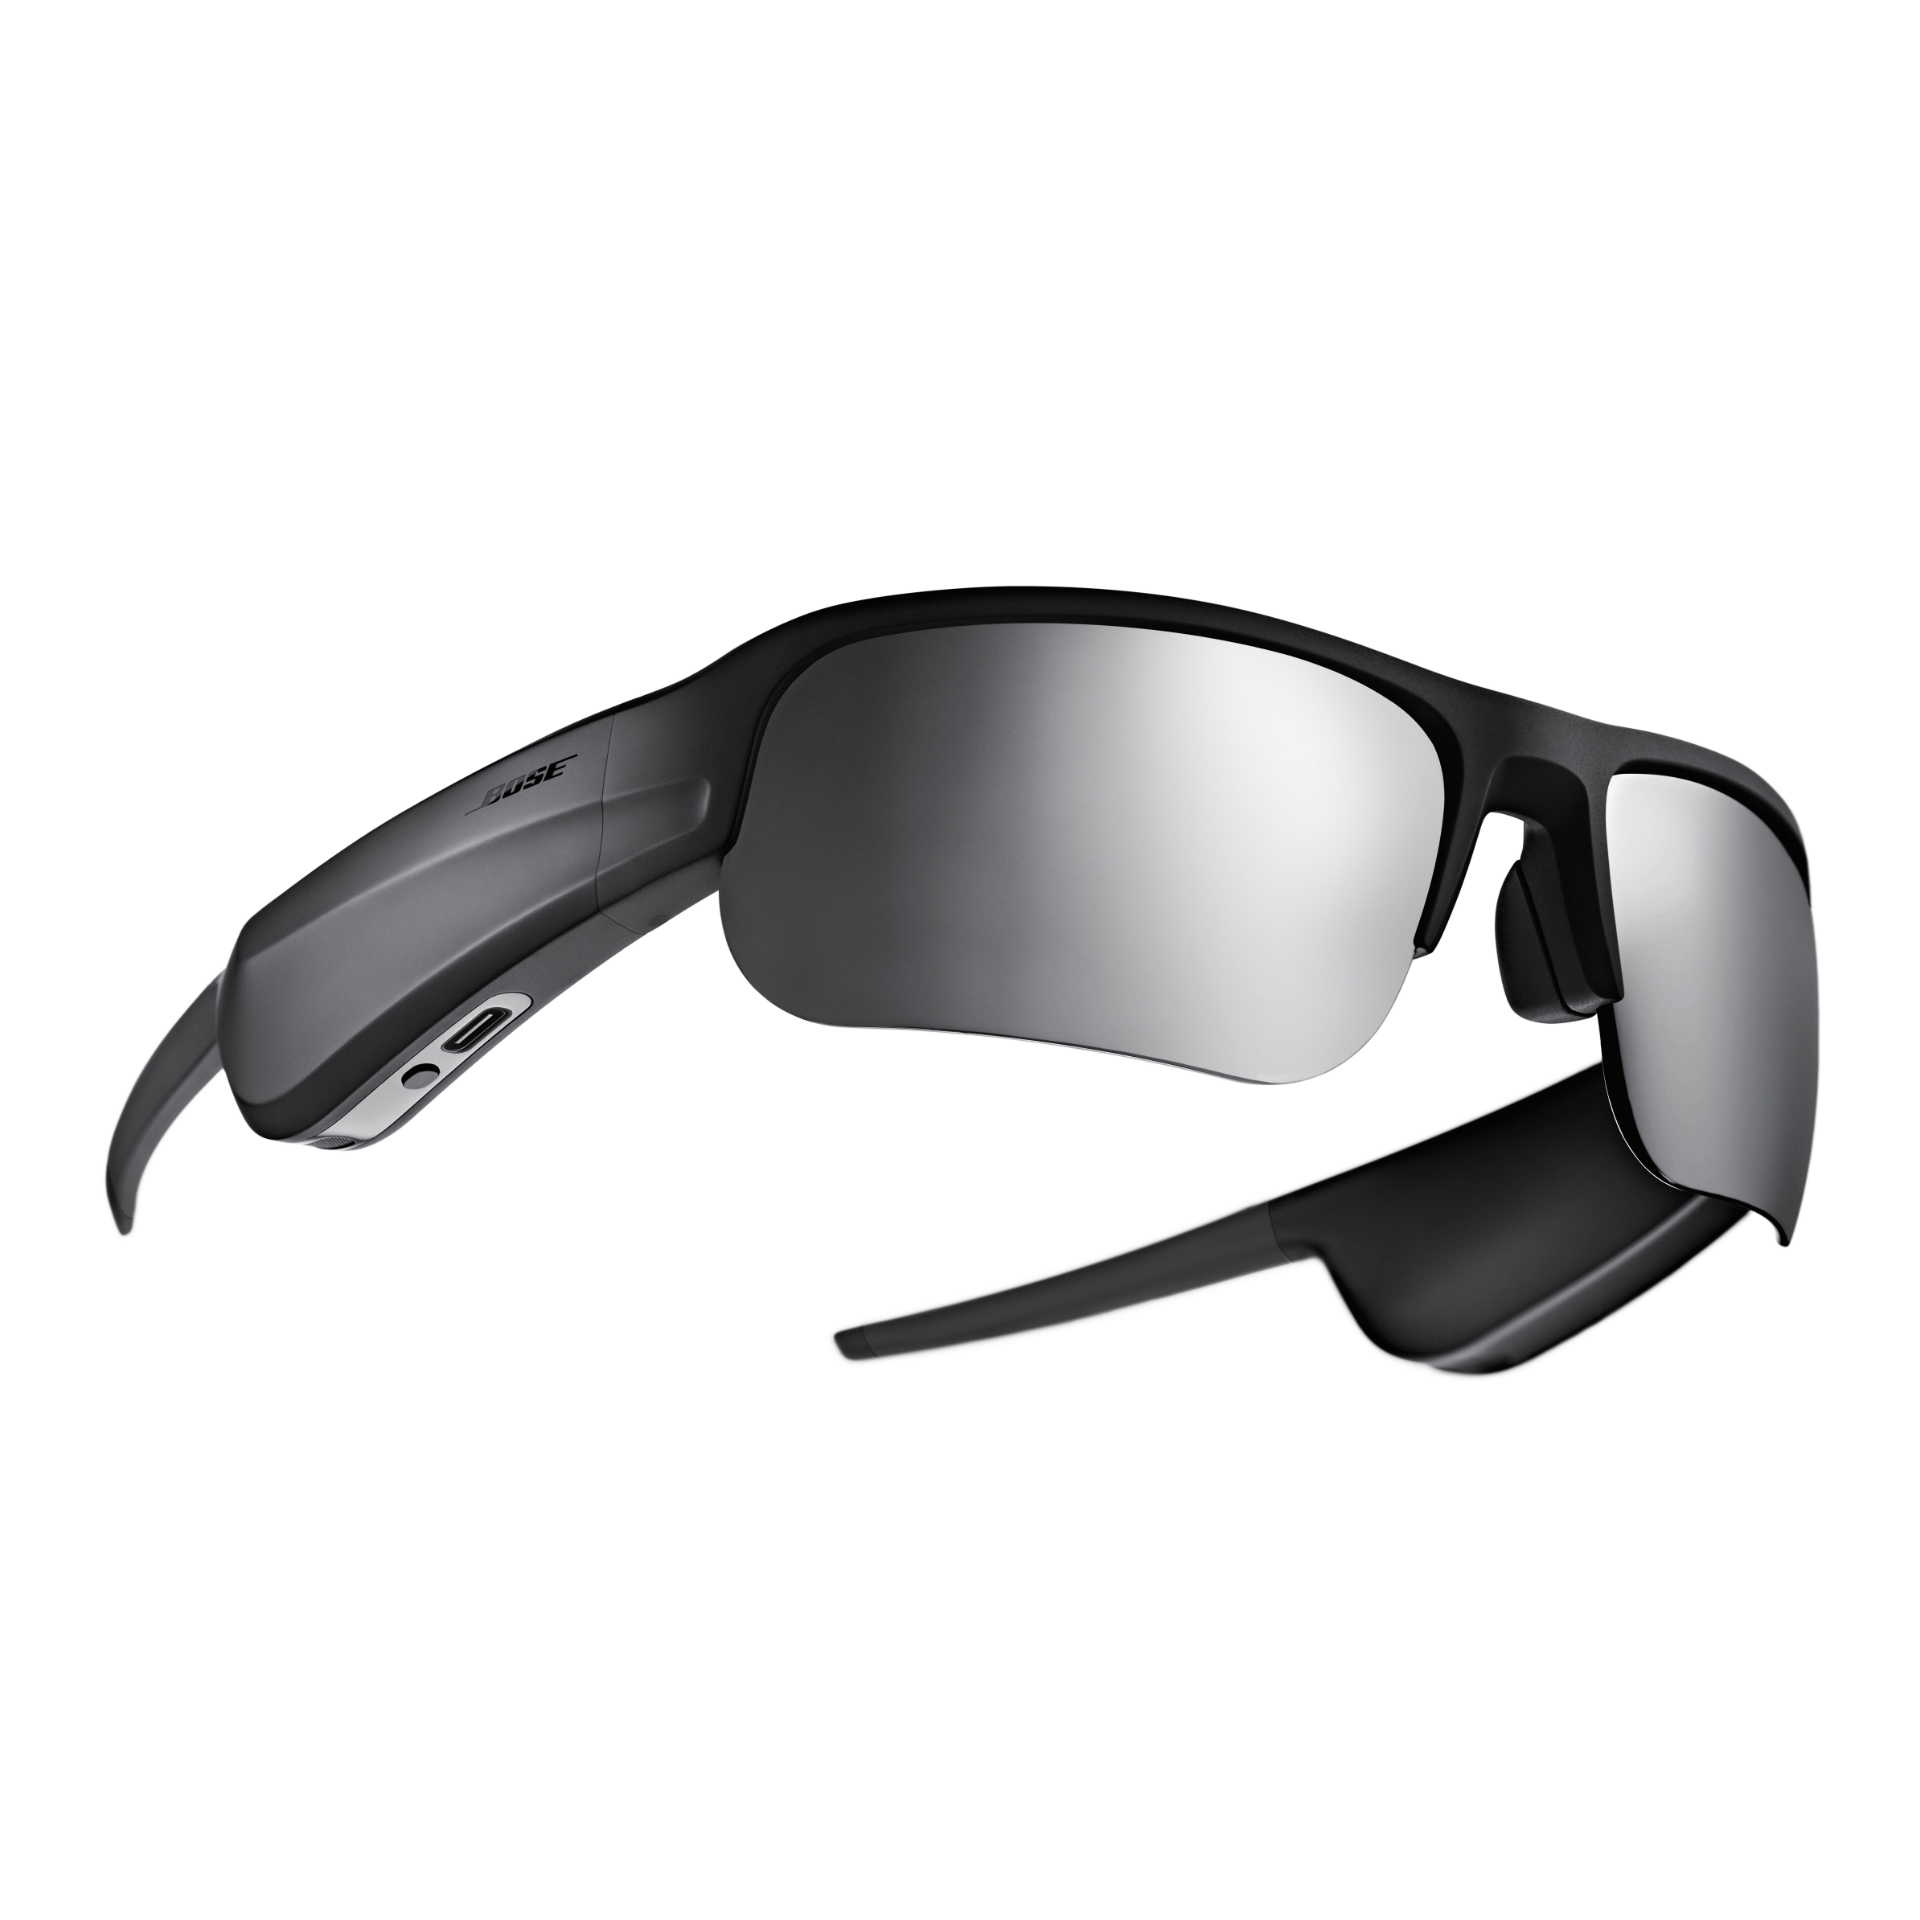 Bose Frames Tempo Bluetooth Sports Sunglasses with Polarized Lenses, Black - image 11 of 13